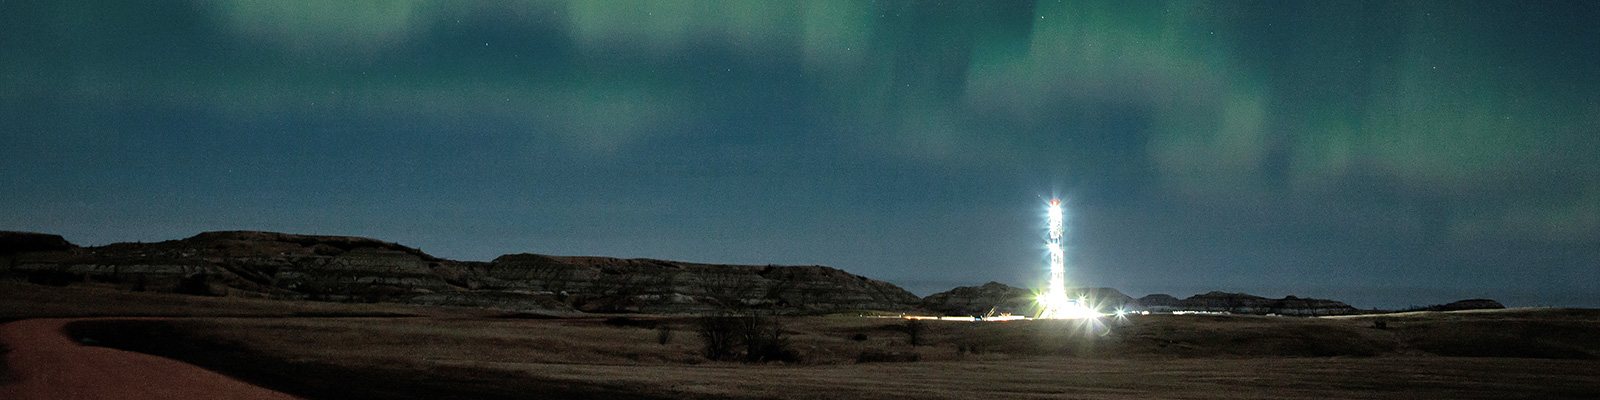 Oil field lit up at night, near Mandaree, with northern lights in the background